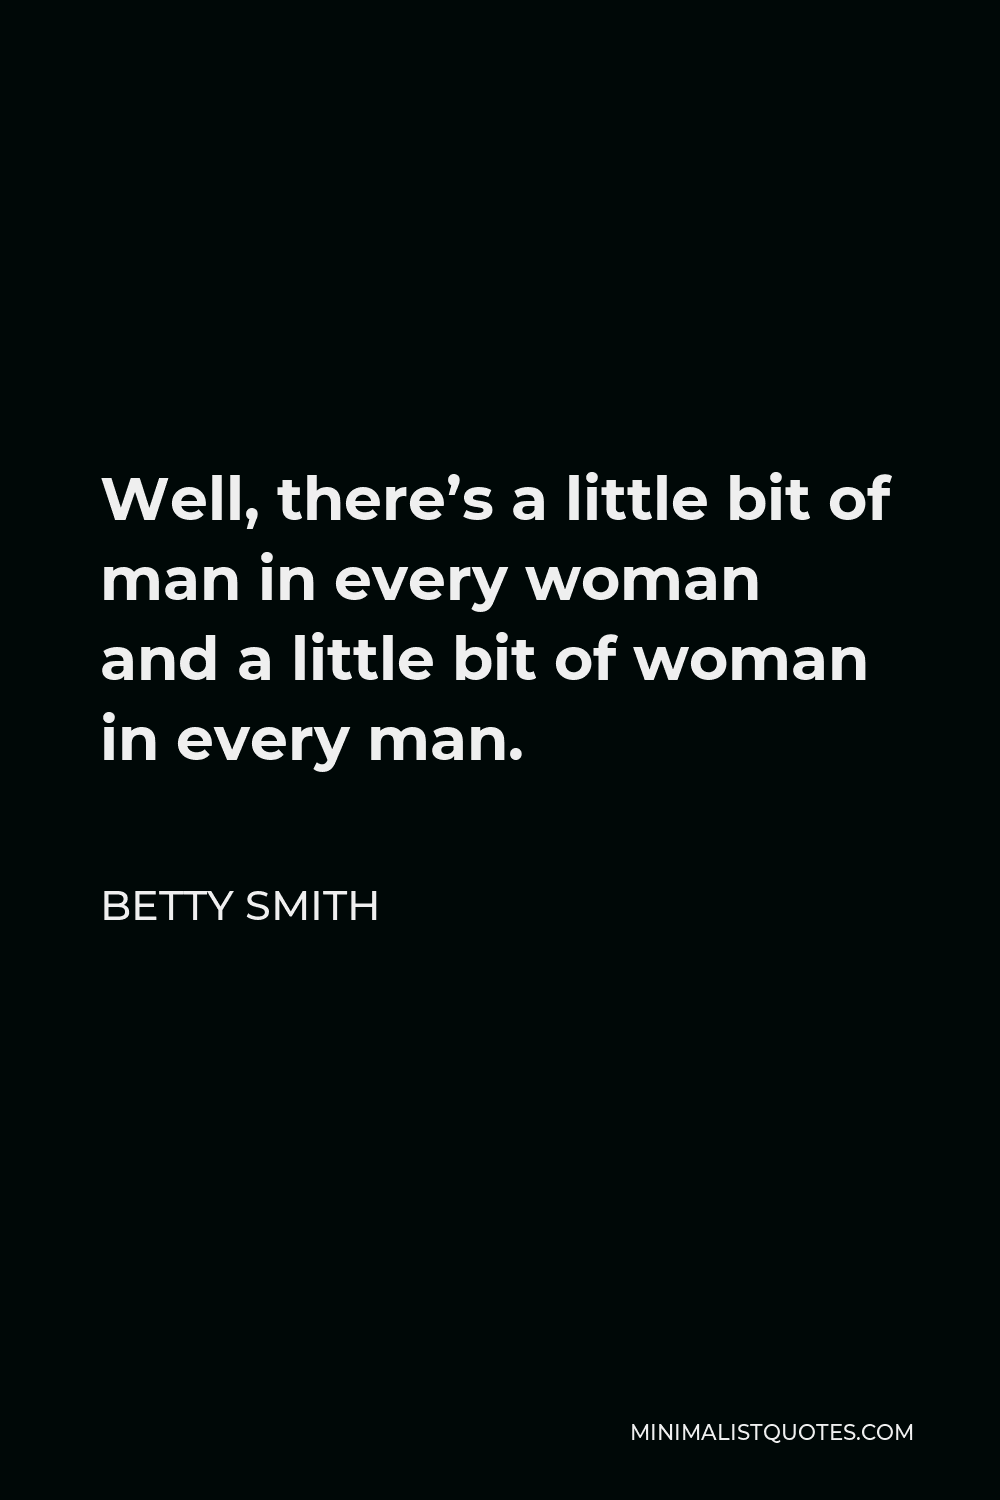 Betty Smith Quote - Well, there’s a little bit of man in every woman and a little bit of woman in every man.